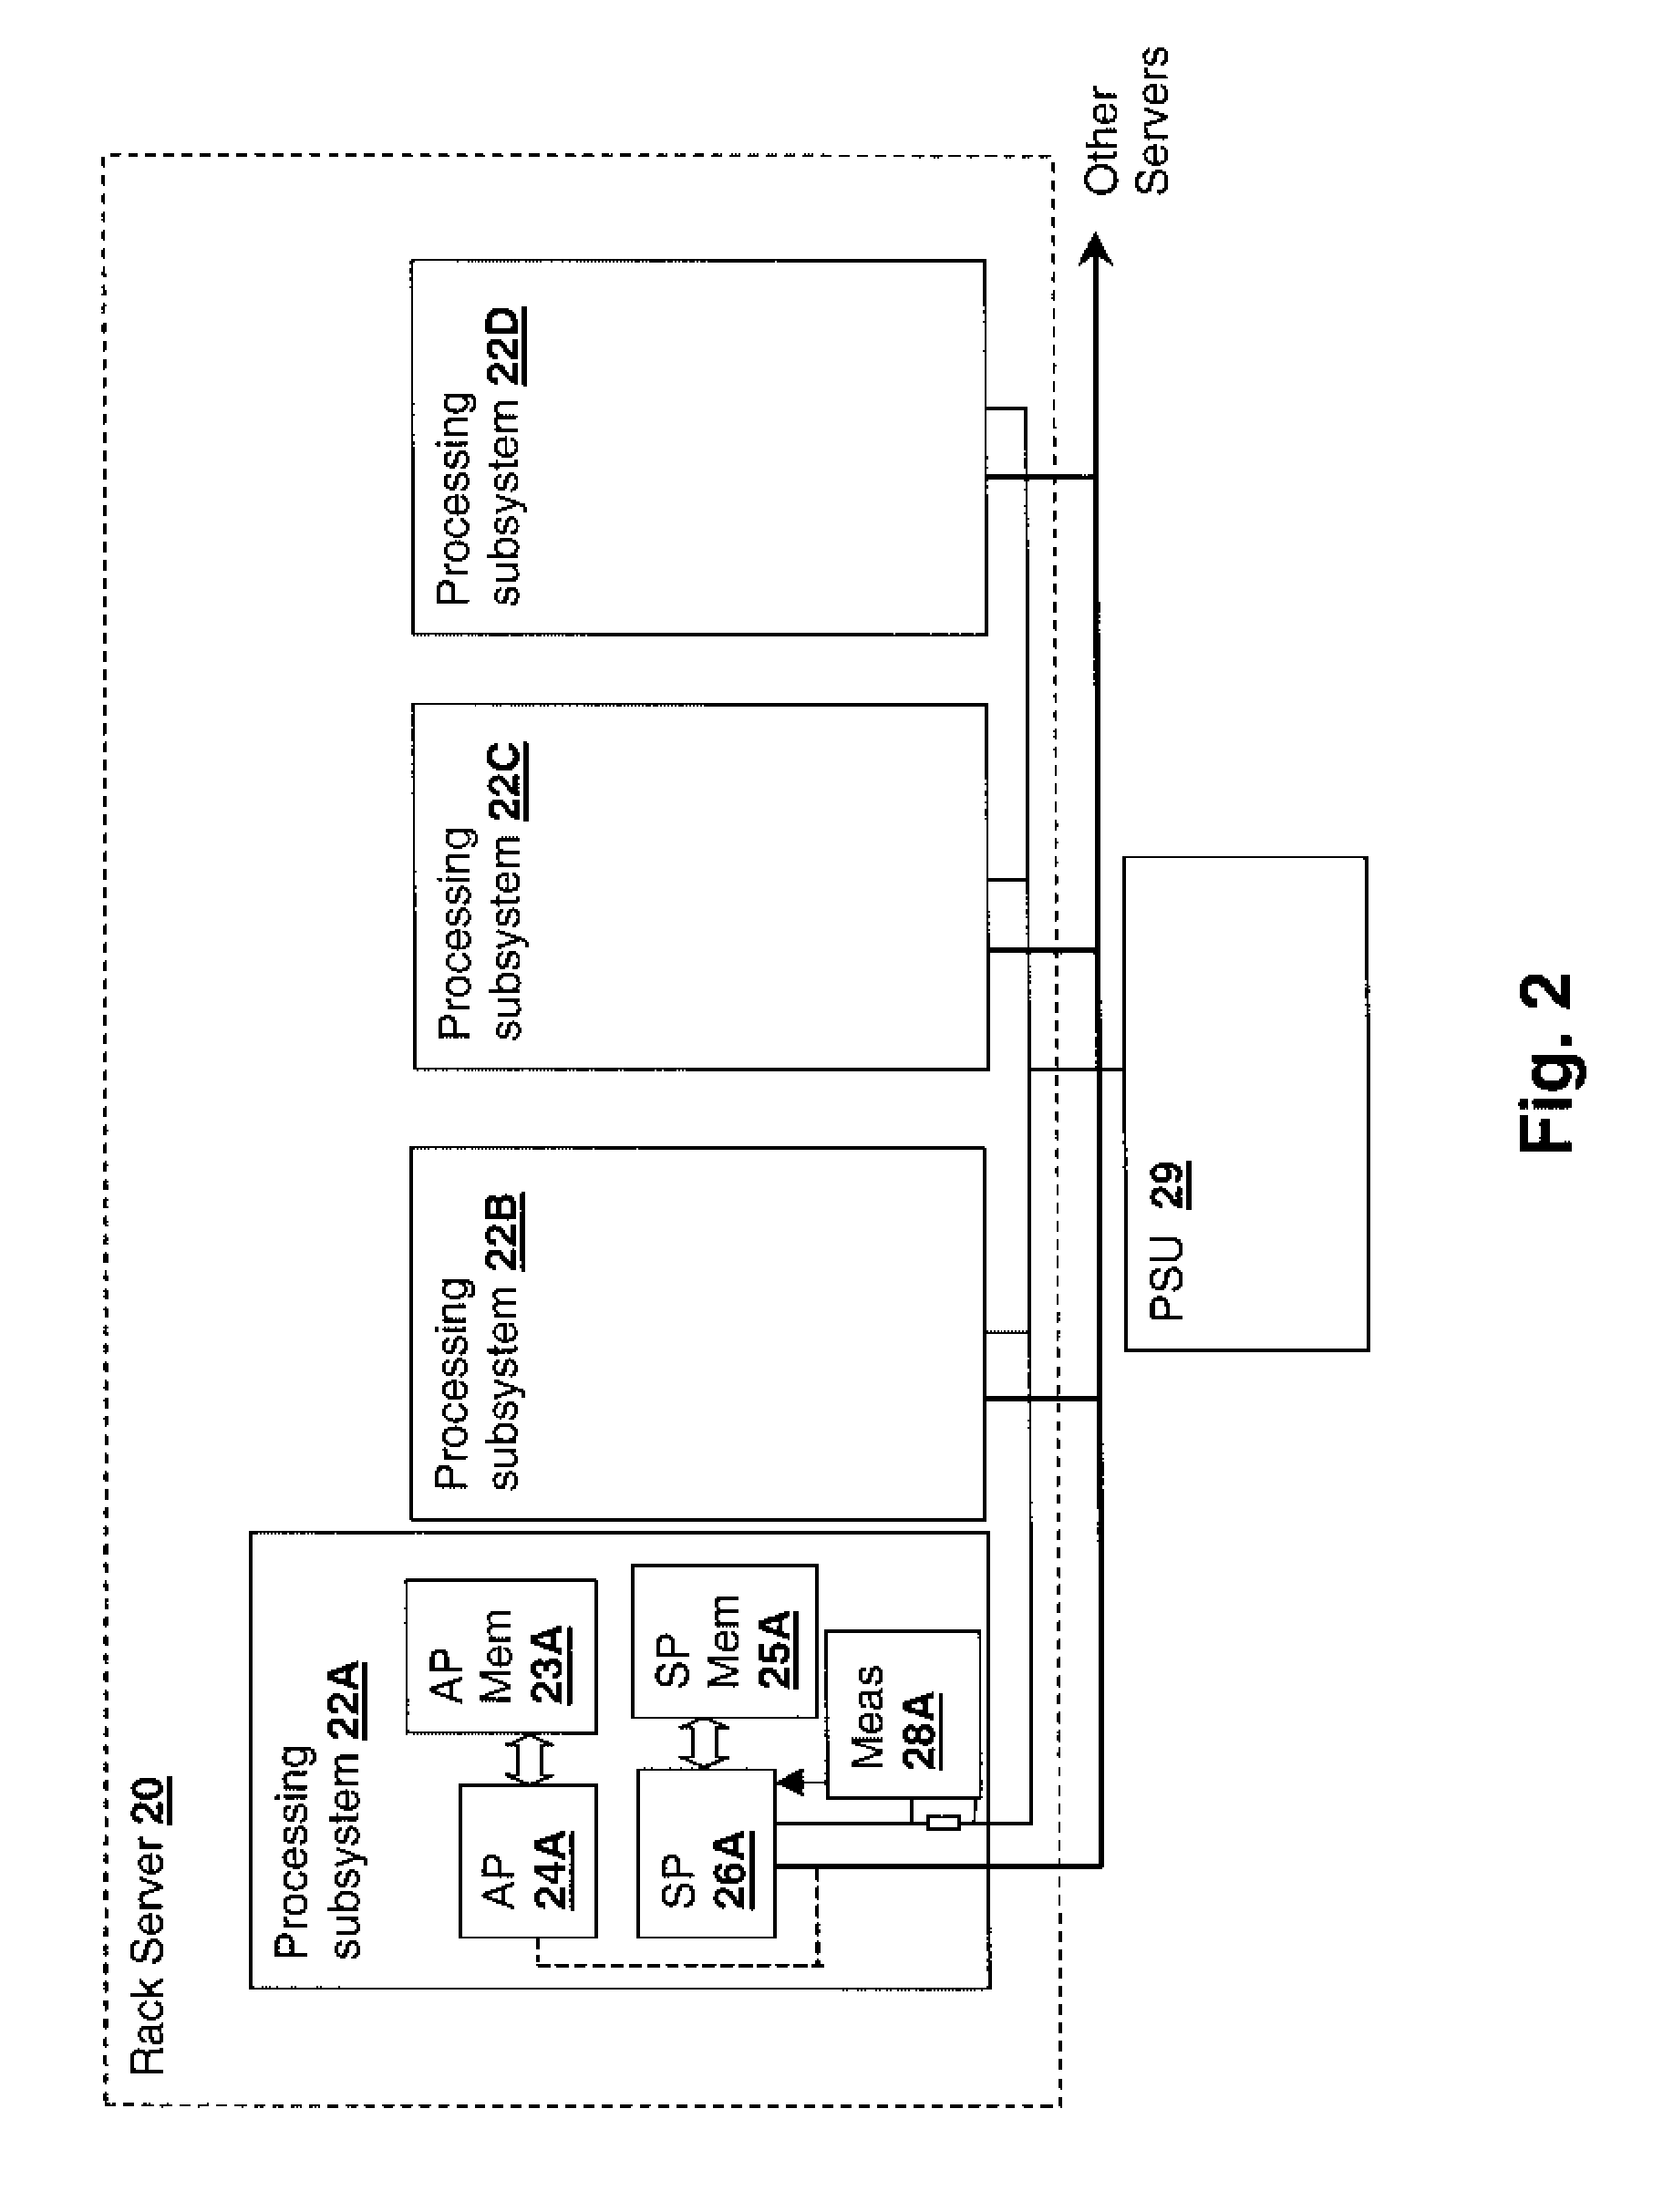 Method and System for Improving Processing Performance by Using Activity Factor Headroom